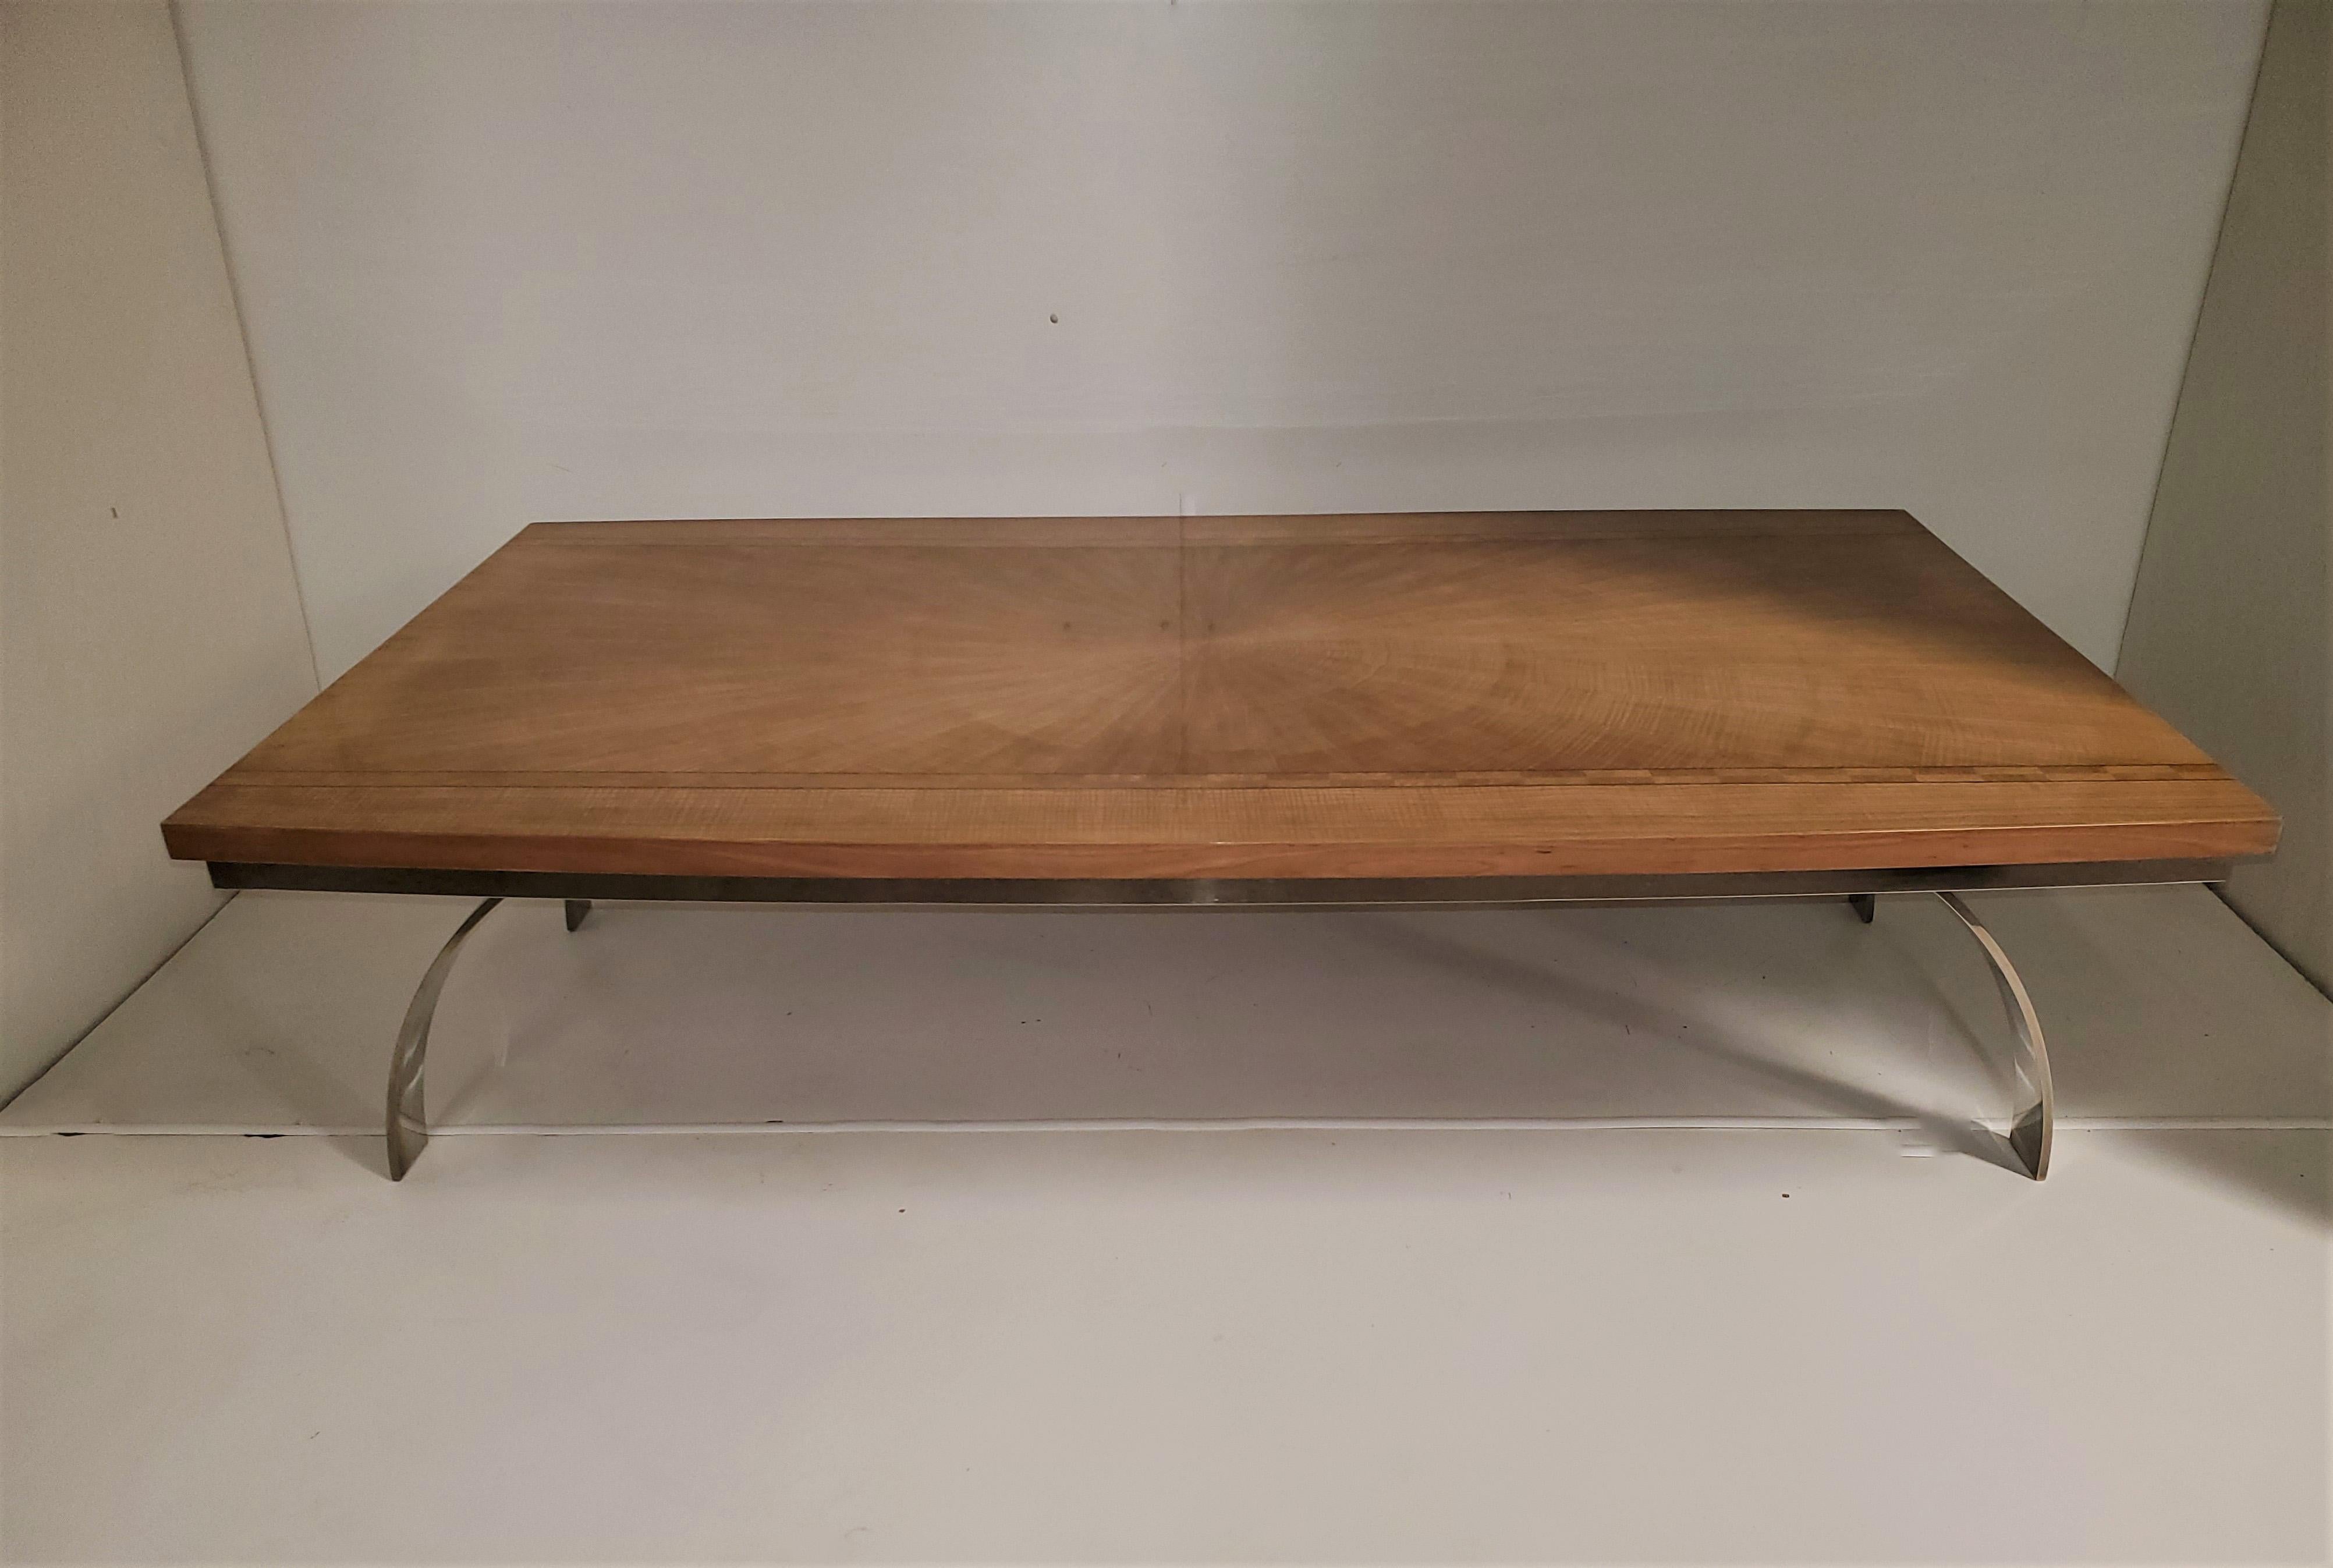 20th Century Large French Art Deco Starburst Inlaid Sycamore Coffee Table W/ Nickeled Bronze